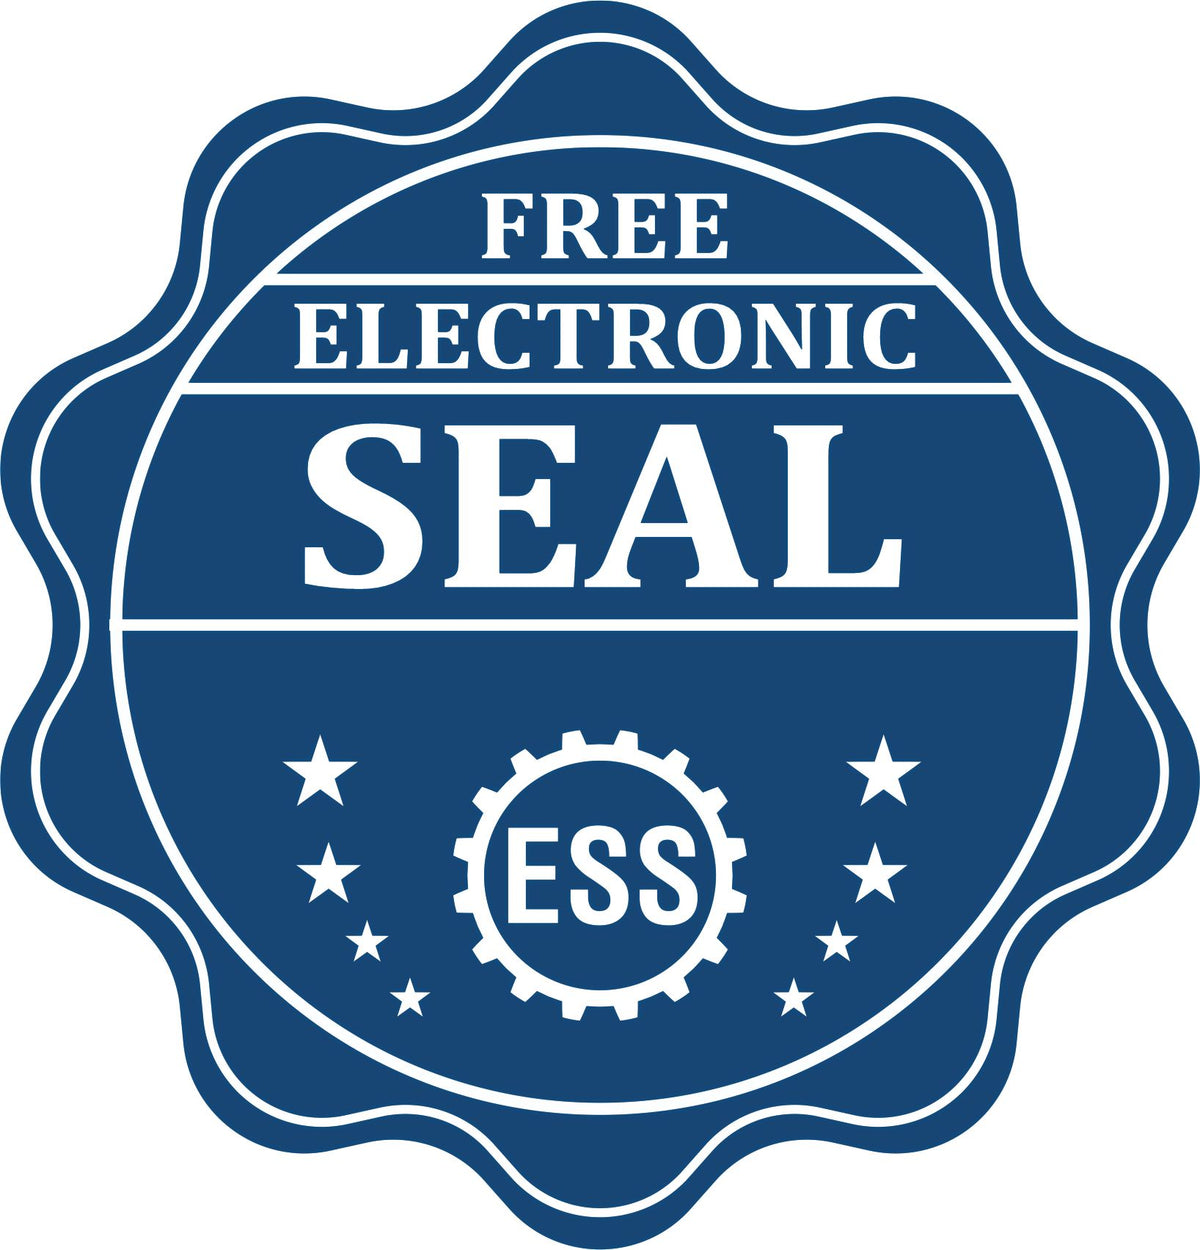 A badge showing a free electronic seal for the Long Reach Iowa Land Surveyor Seal with stars and the ESS gear on the emblem.